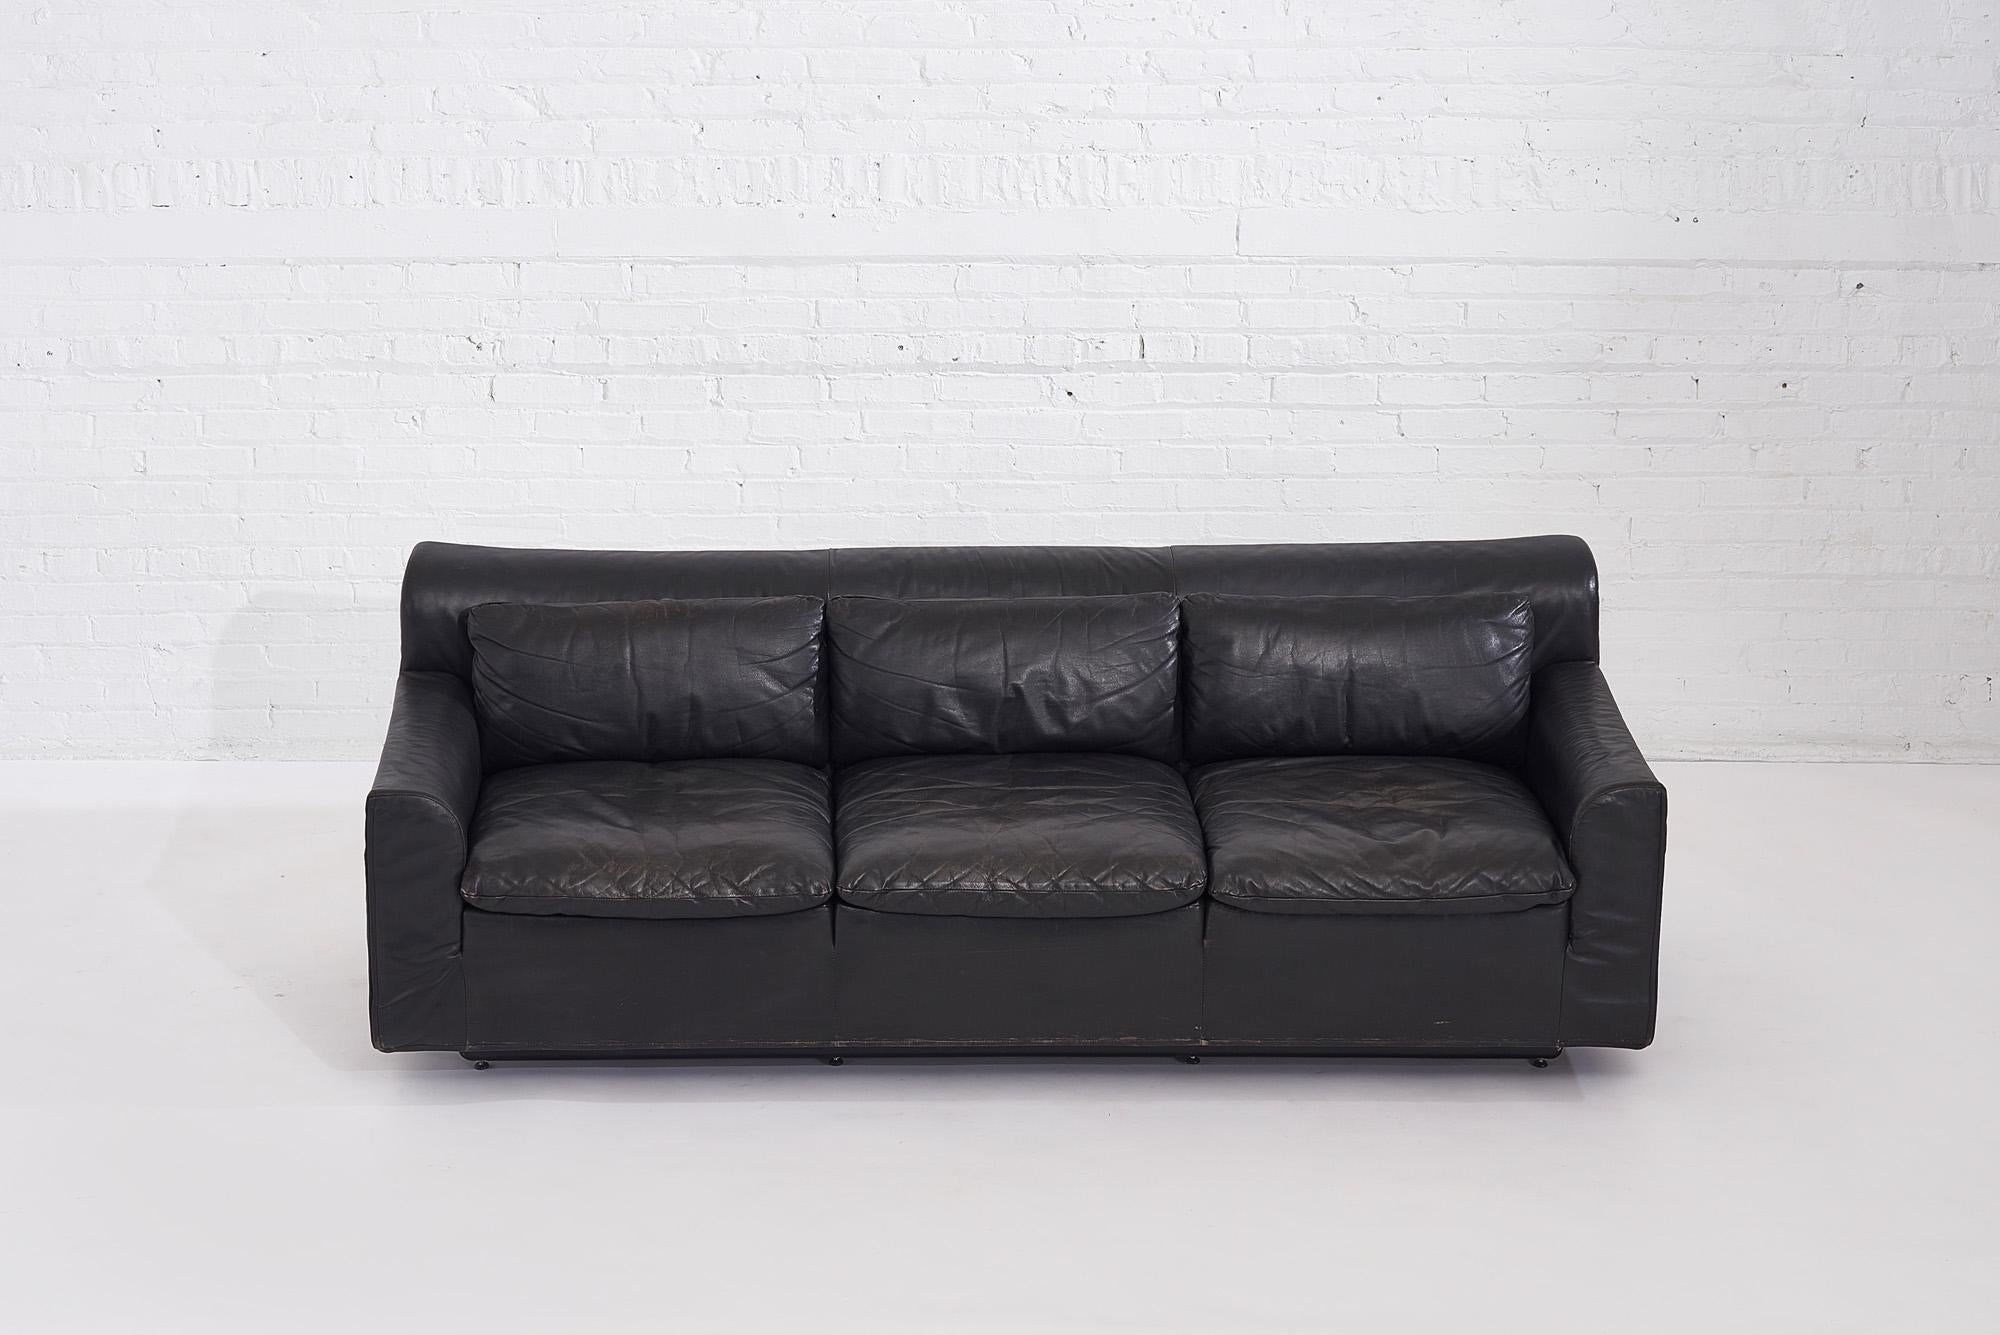 Rare Heli sofa designed by Otto Zapf for Knoll, circa 1980. Thick black leather has perfect lightly broken in patina. To complete the set, we have the matching lounge chairs listed separately.